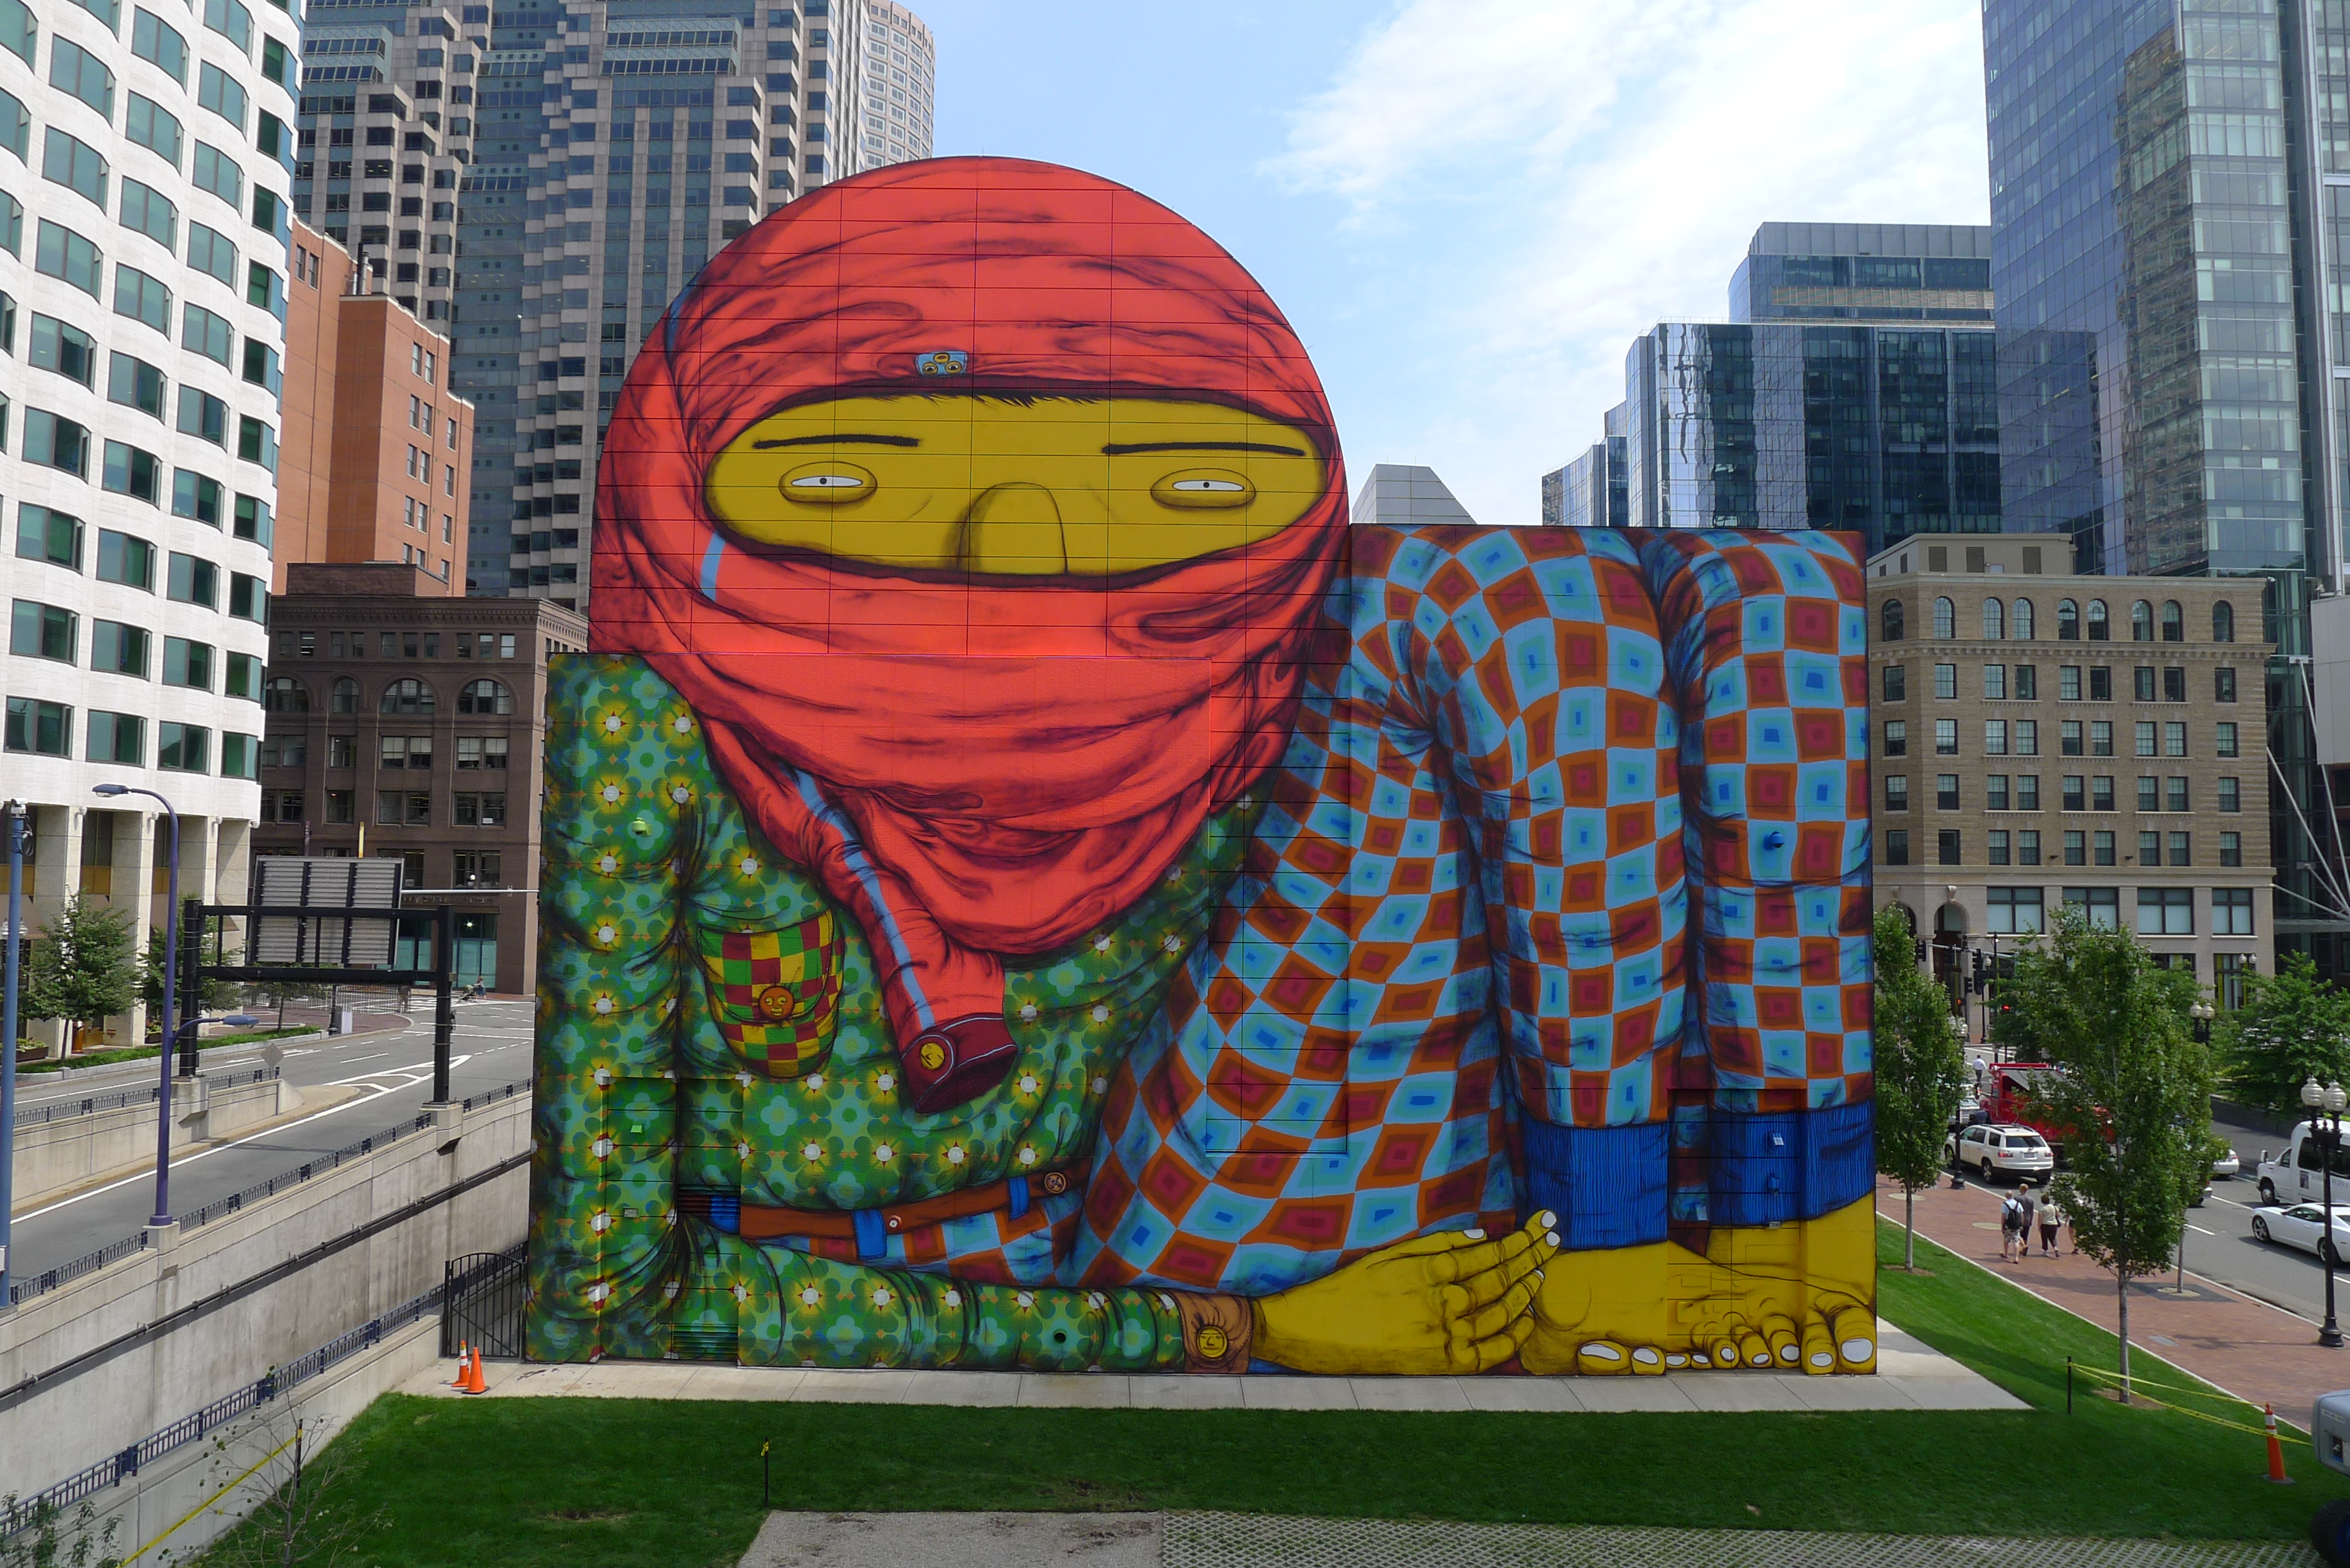 INSTITUTE OF CONTEMPORARY ART, BOSTON AND GREENWAY MURAL